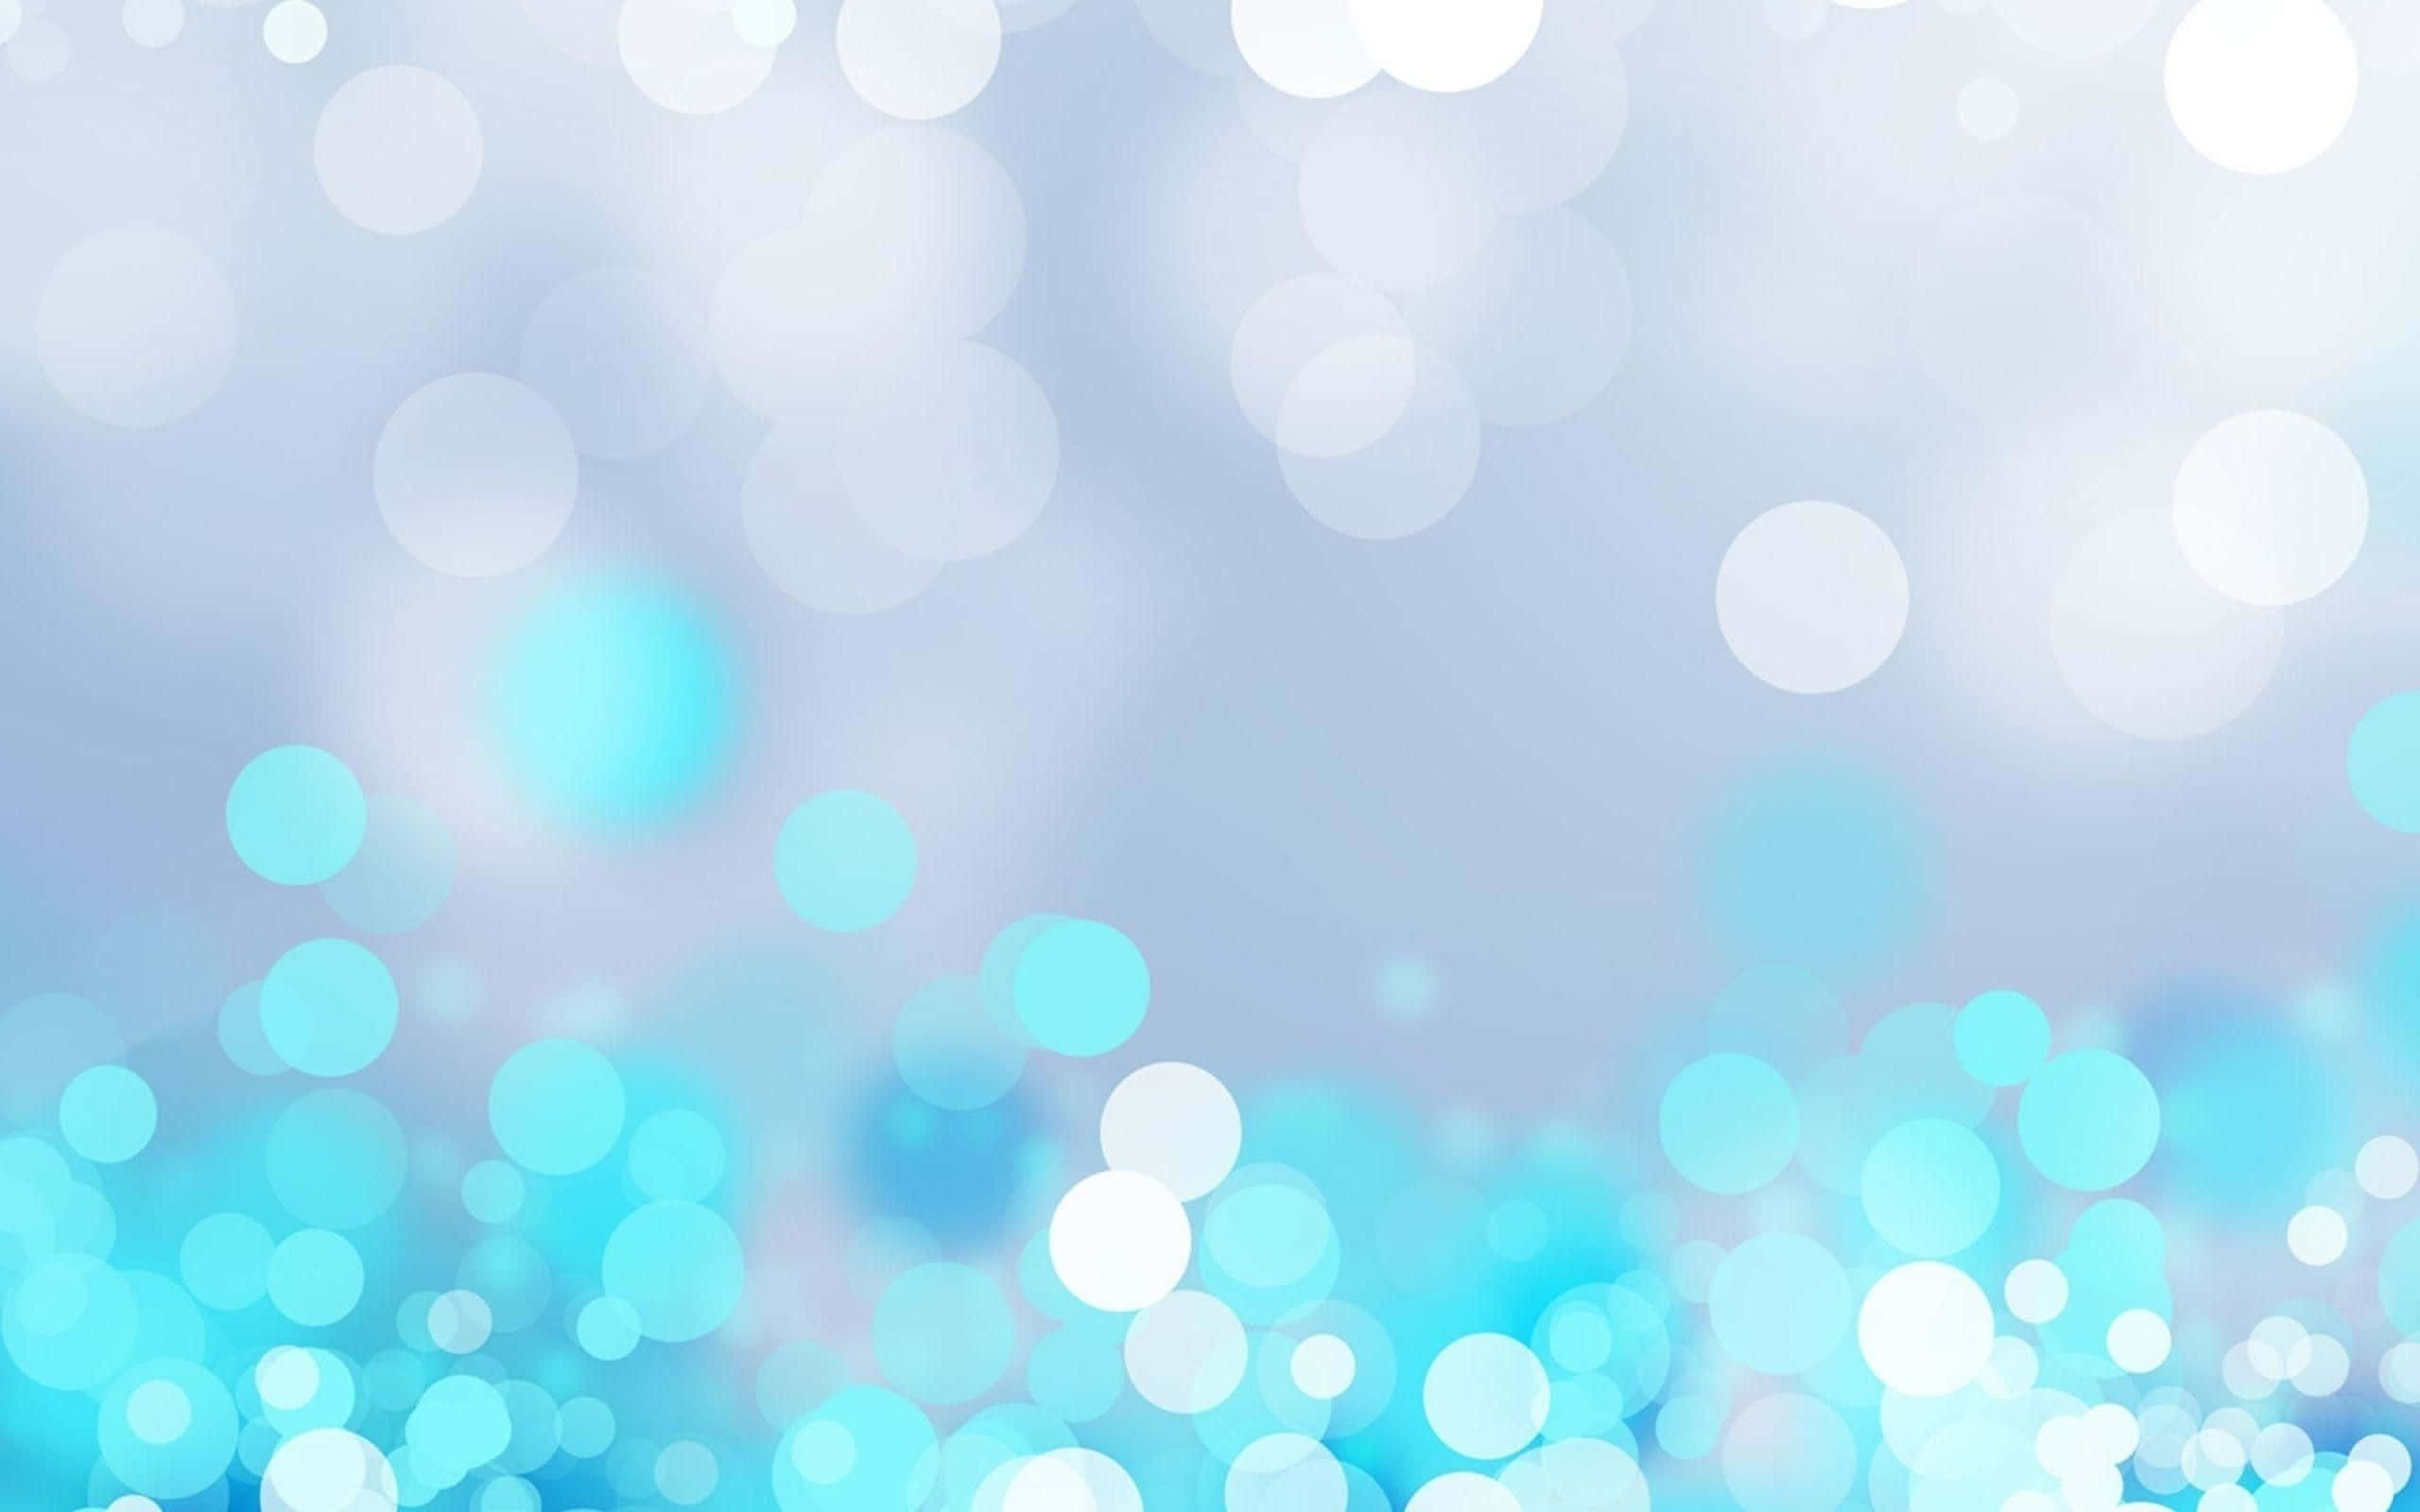 A soothing pastel blue background